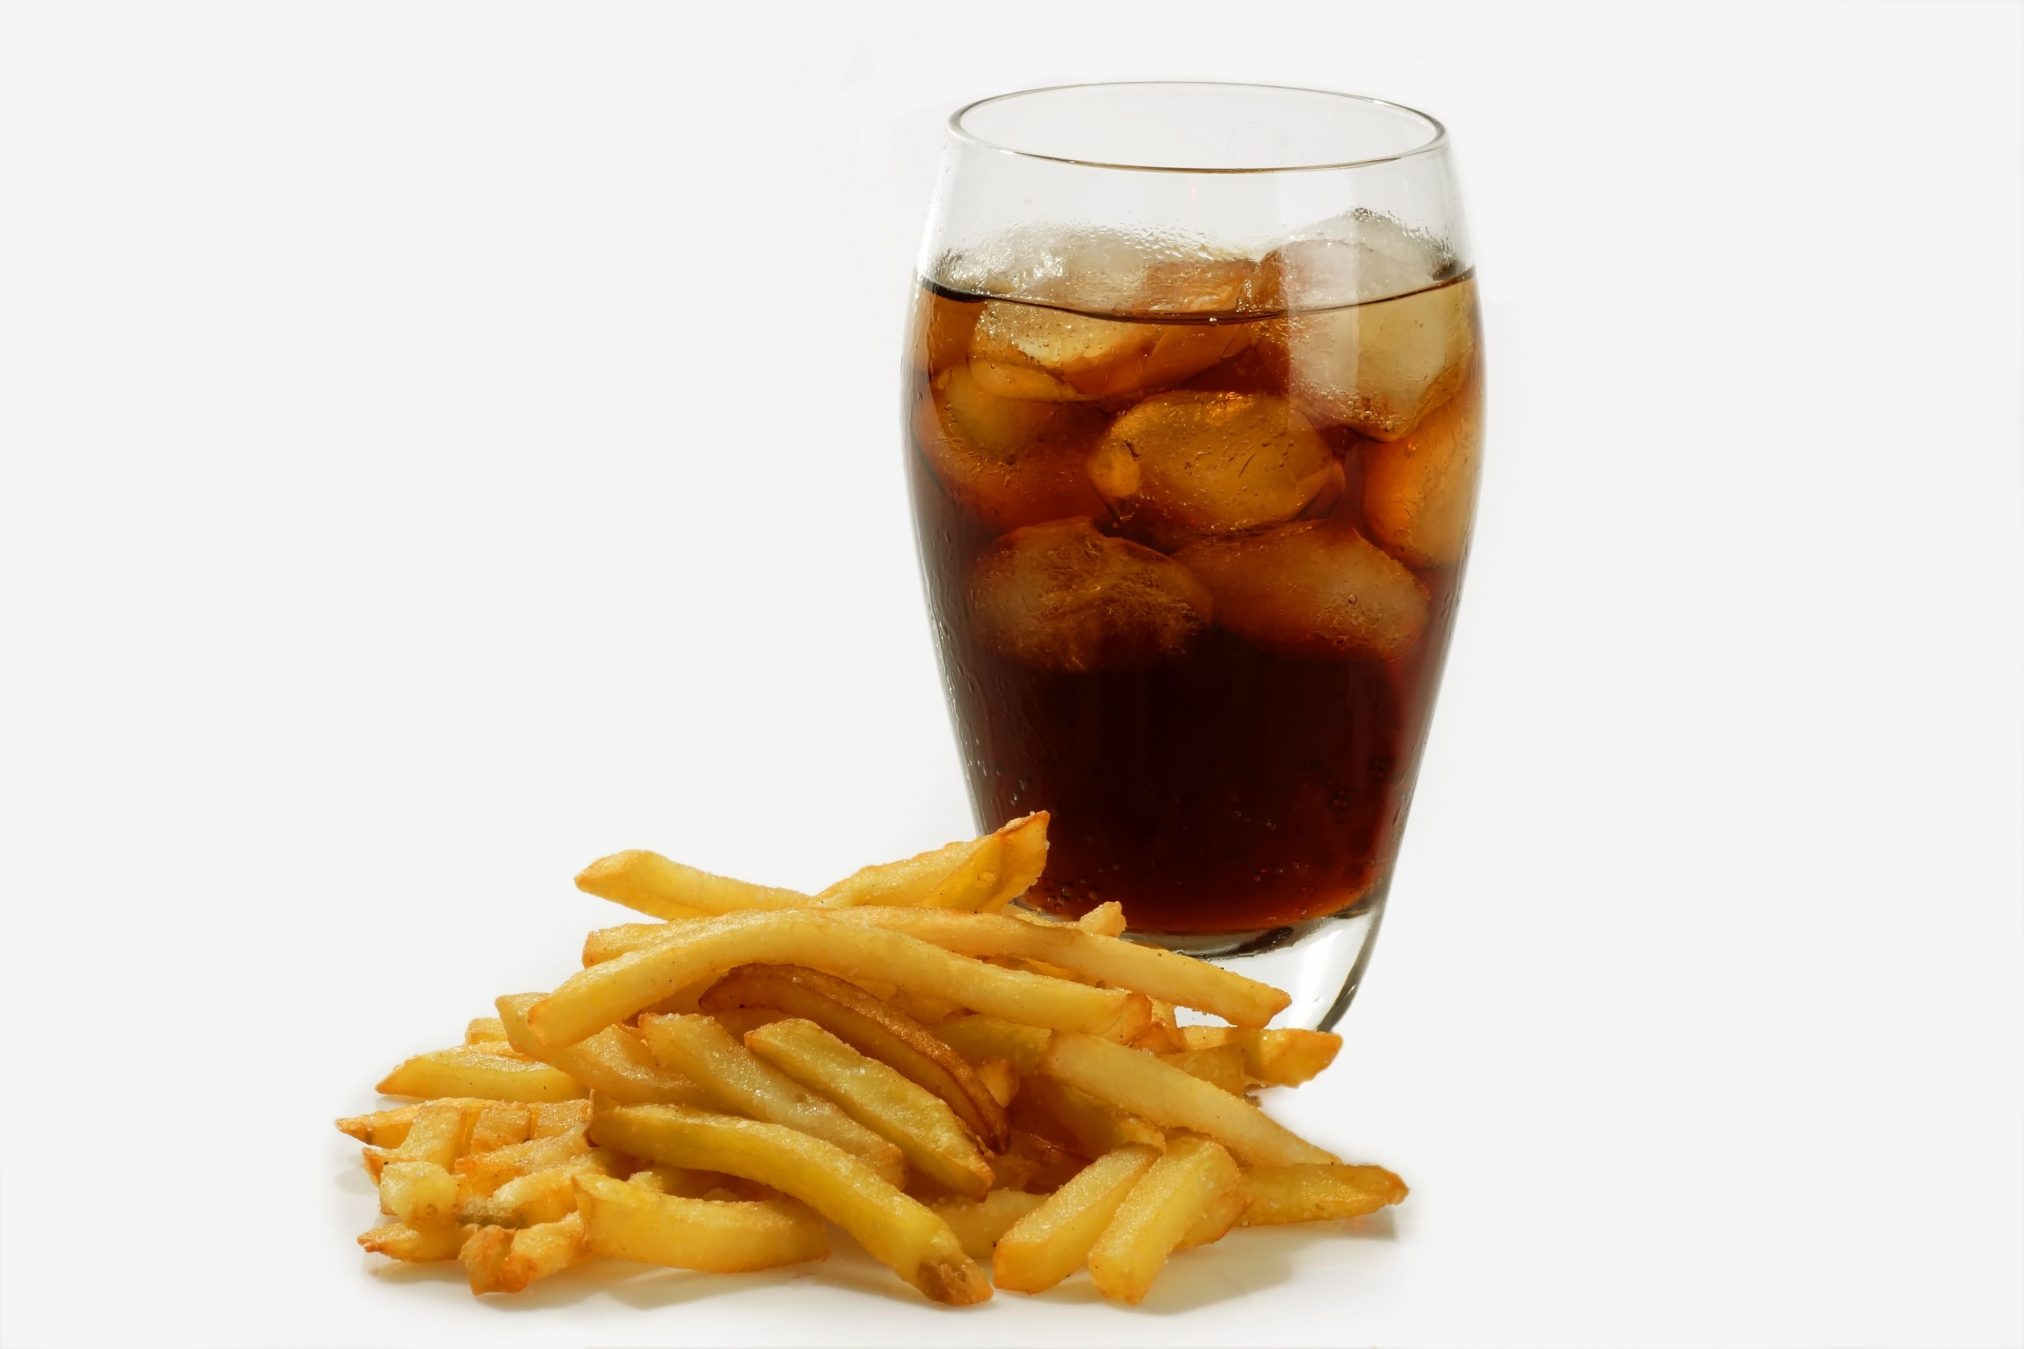 coke and fries